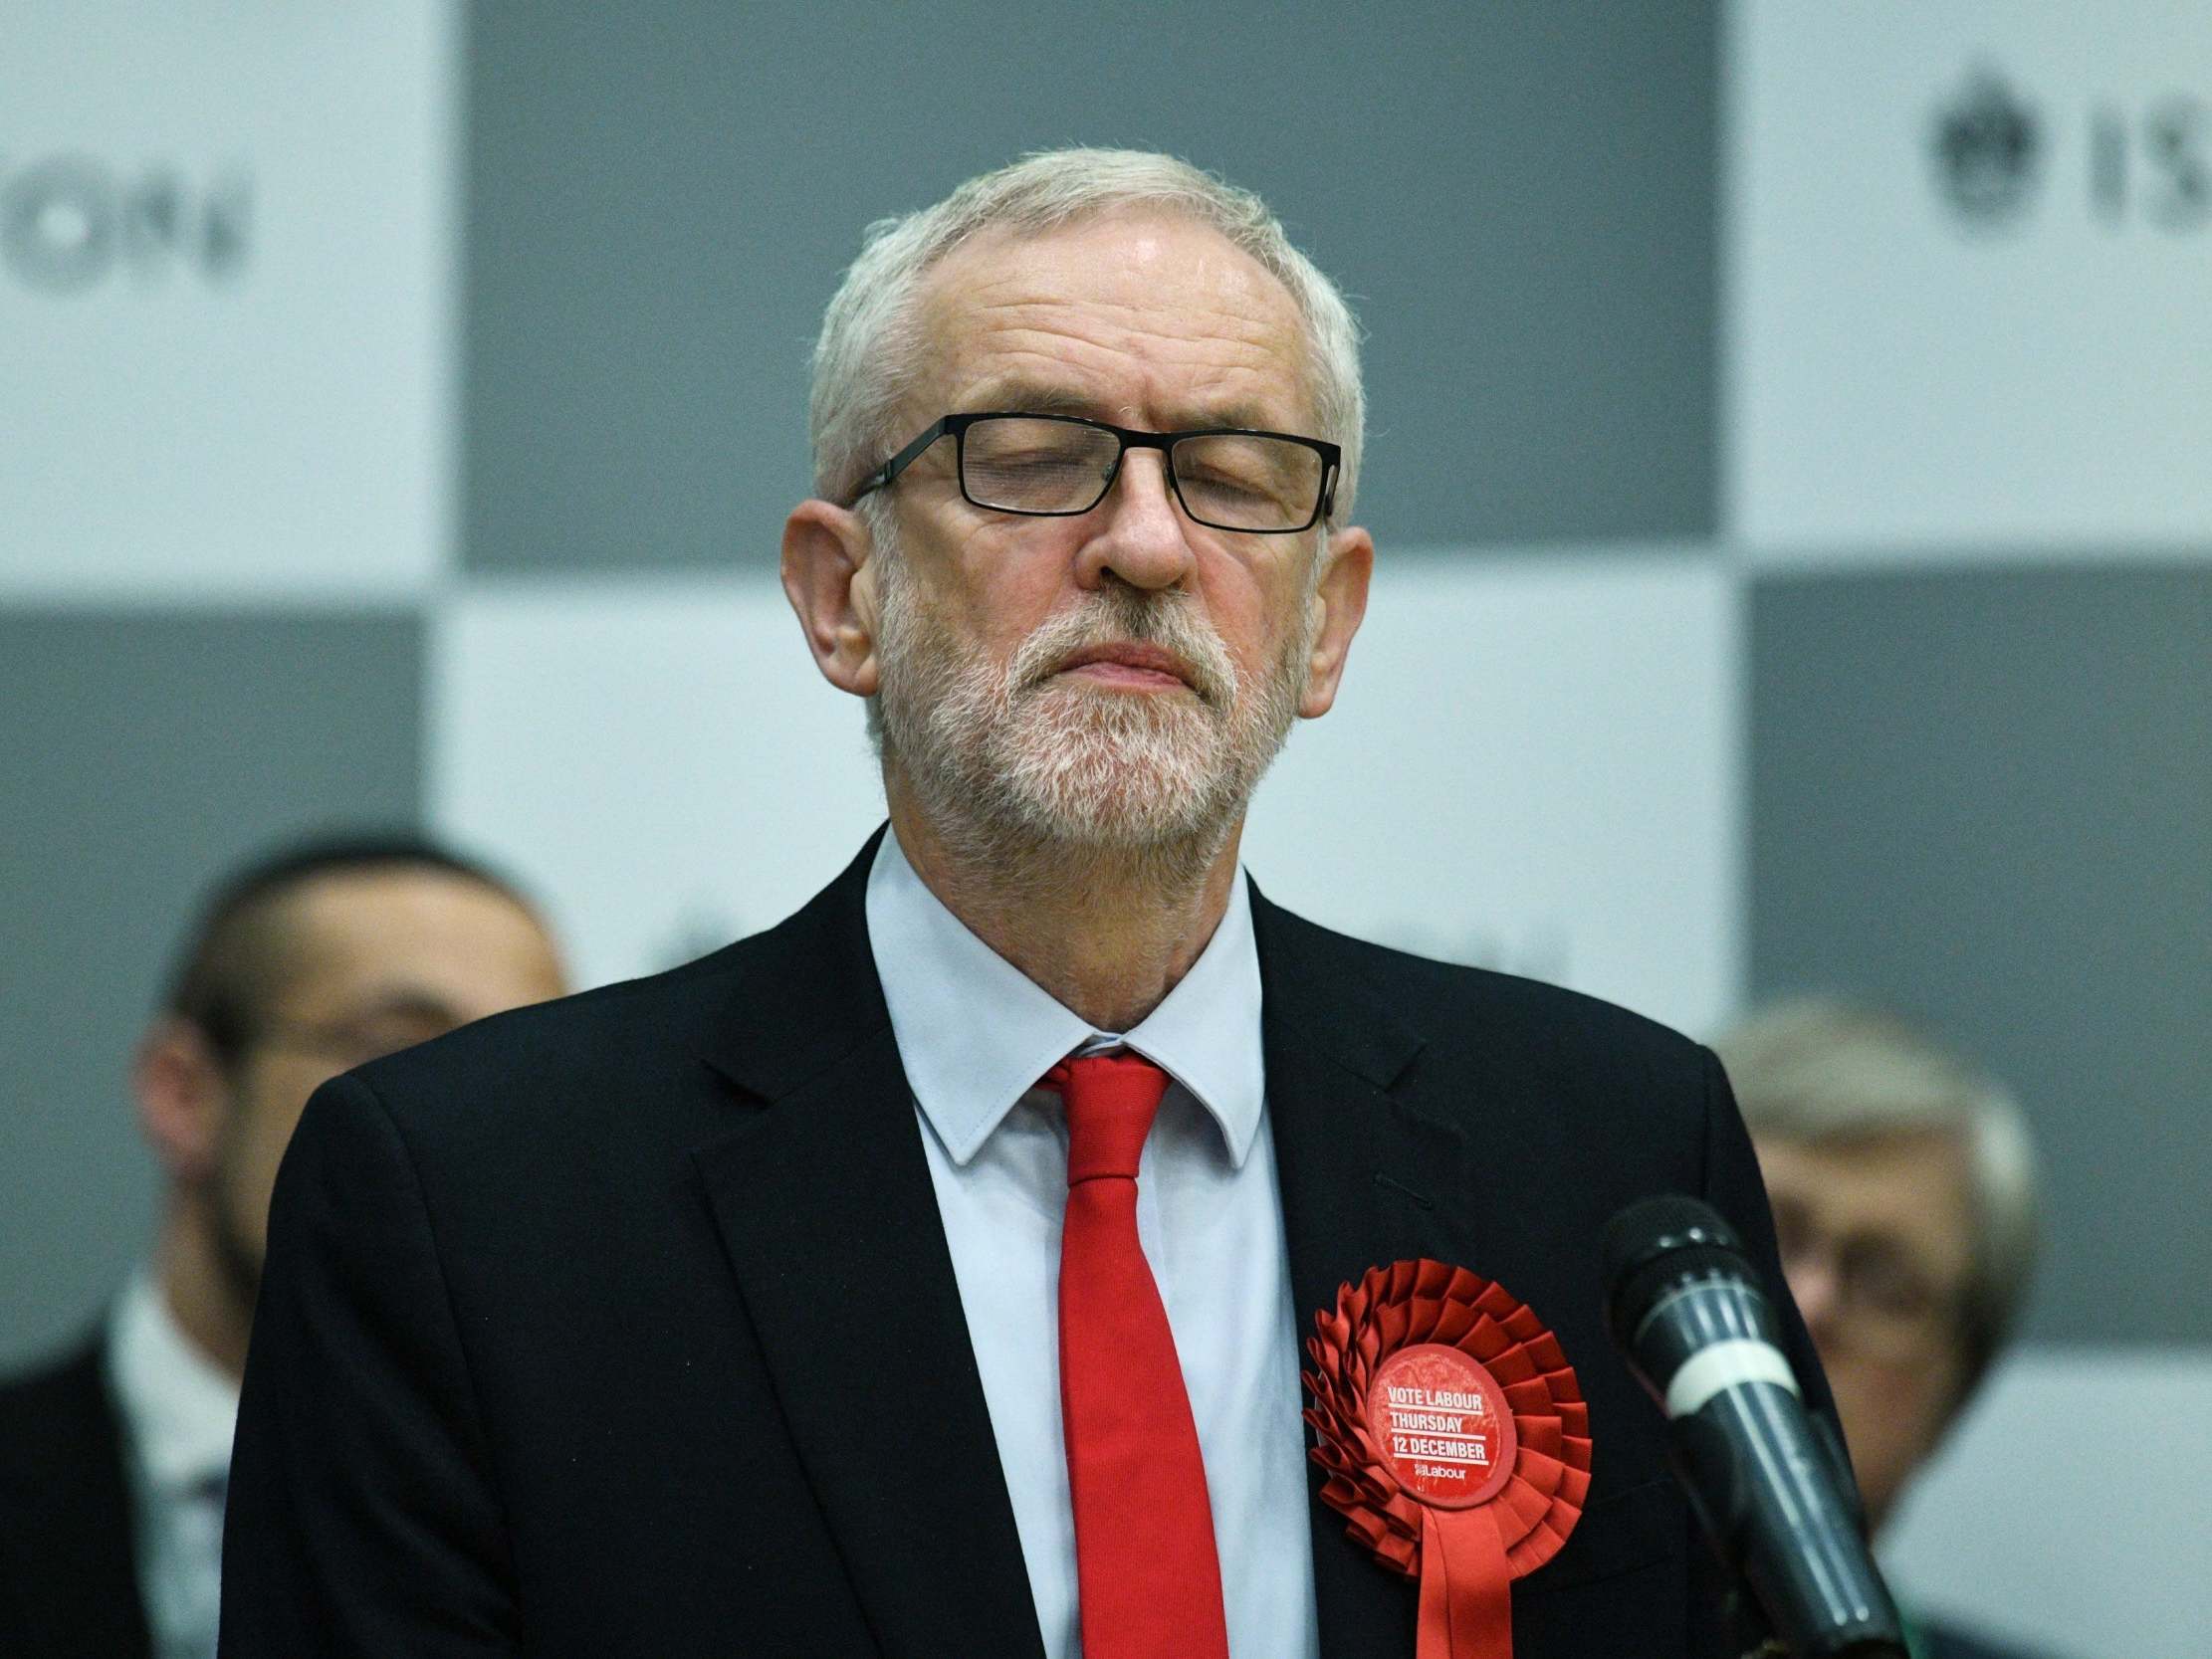 The early signs are that the left will fight to ensure Corbynism survives after Corbyn departs